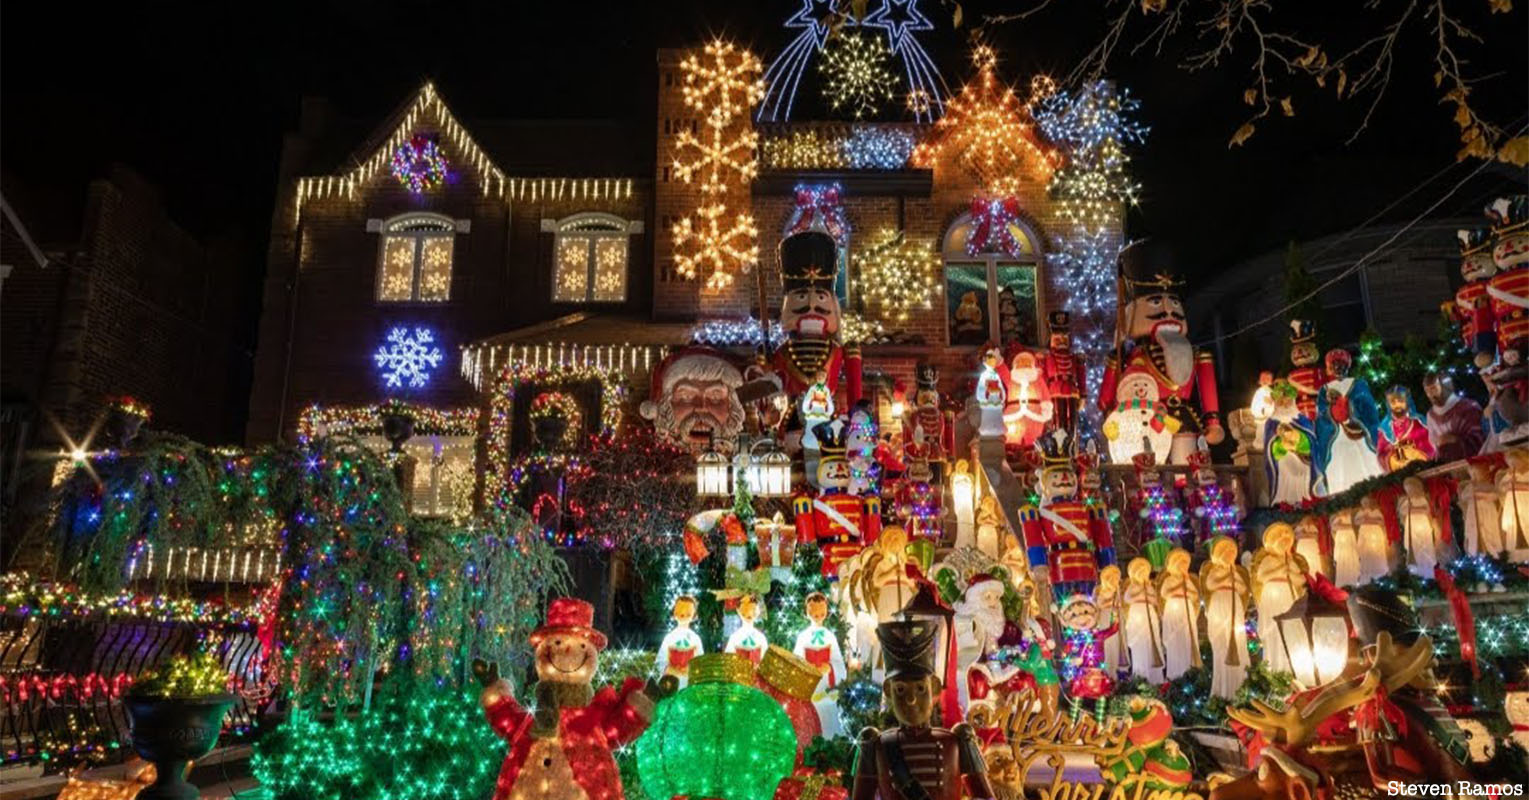 Lucy Spata's Christmas house in Dyker Heights